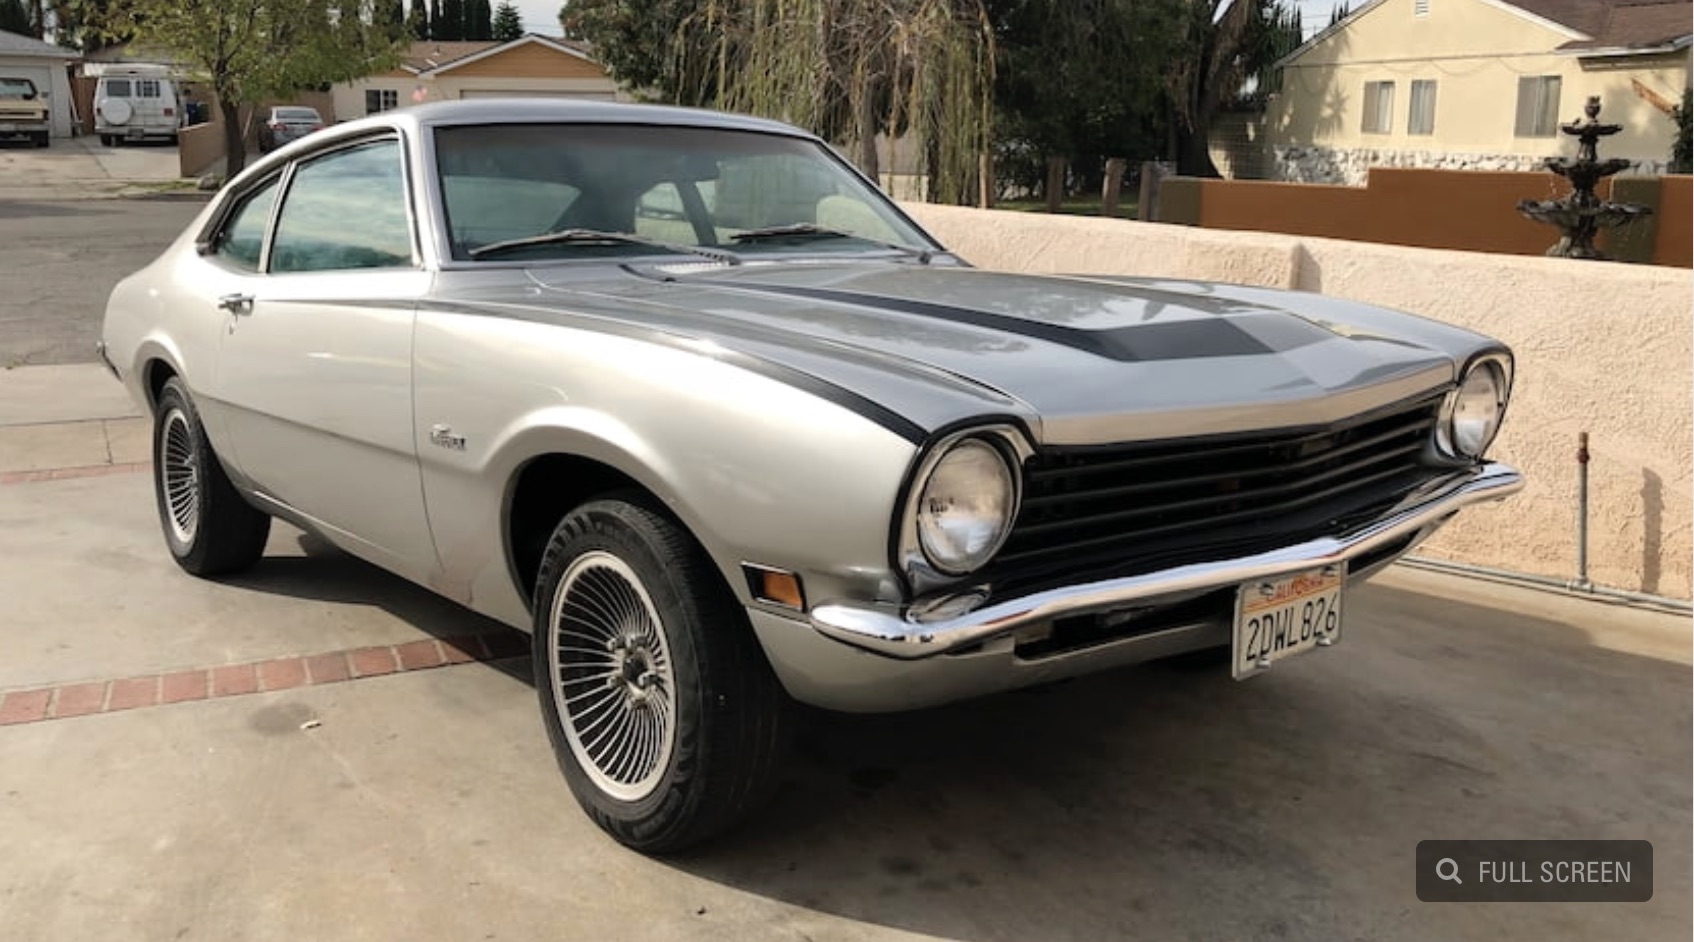 Day Two And An Early Model, Too! This 1970 Ford Maverick Is A Neat Find!